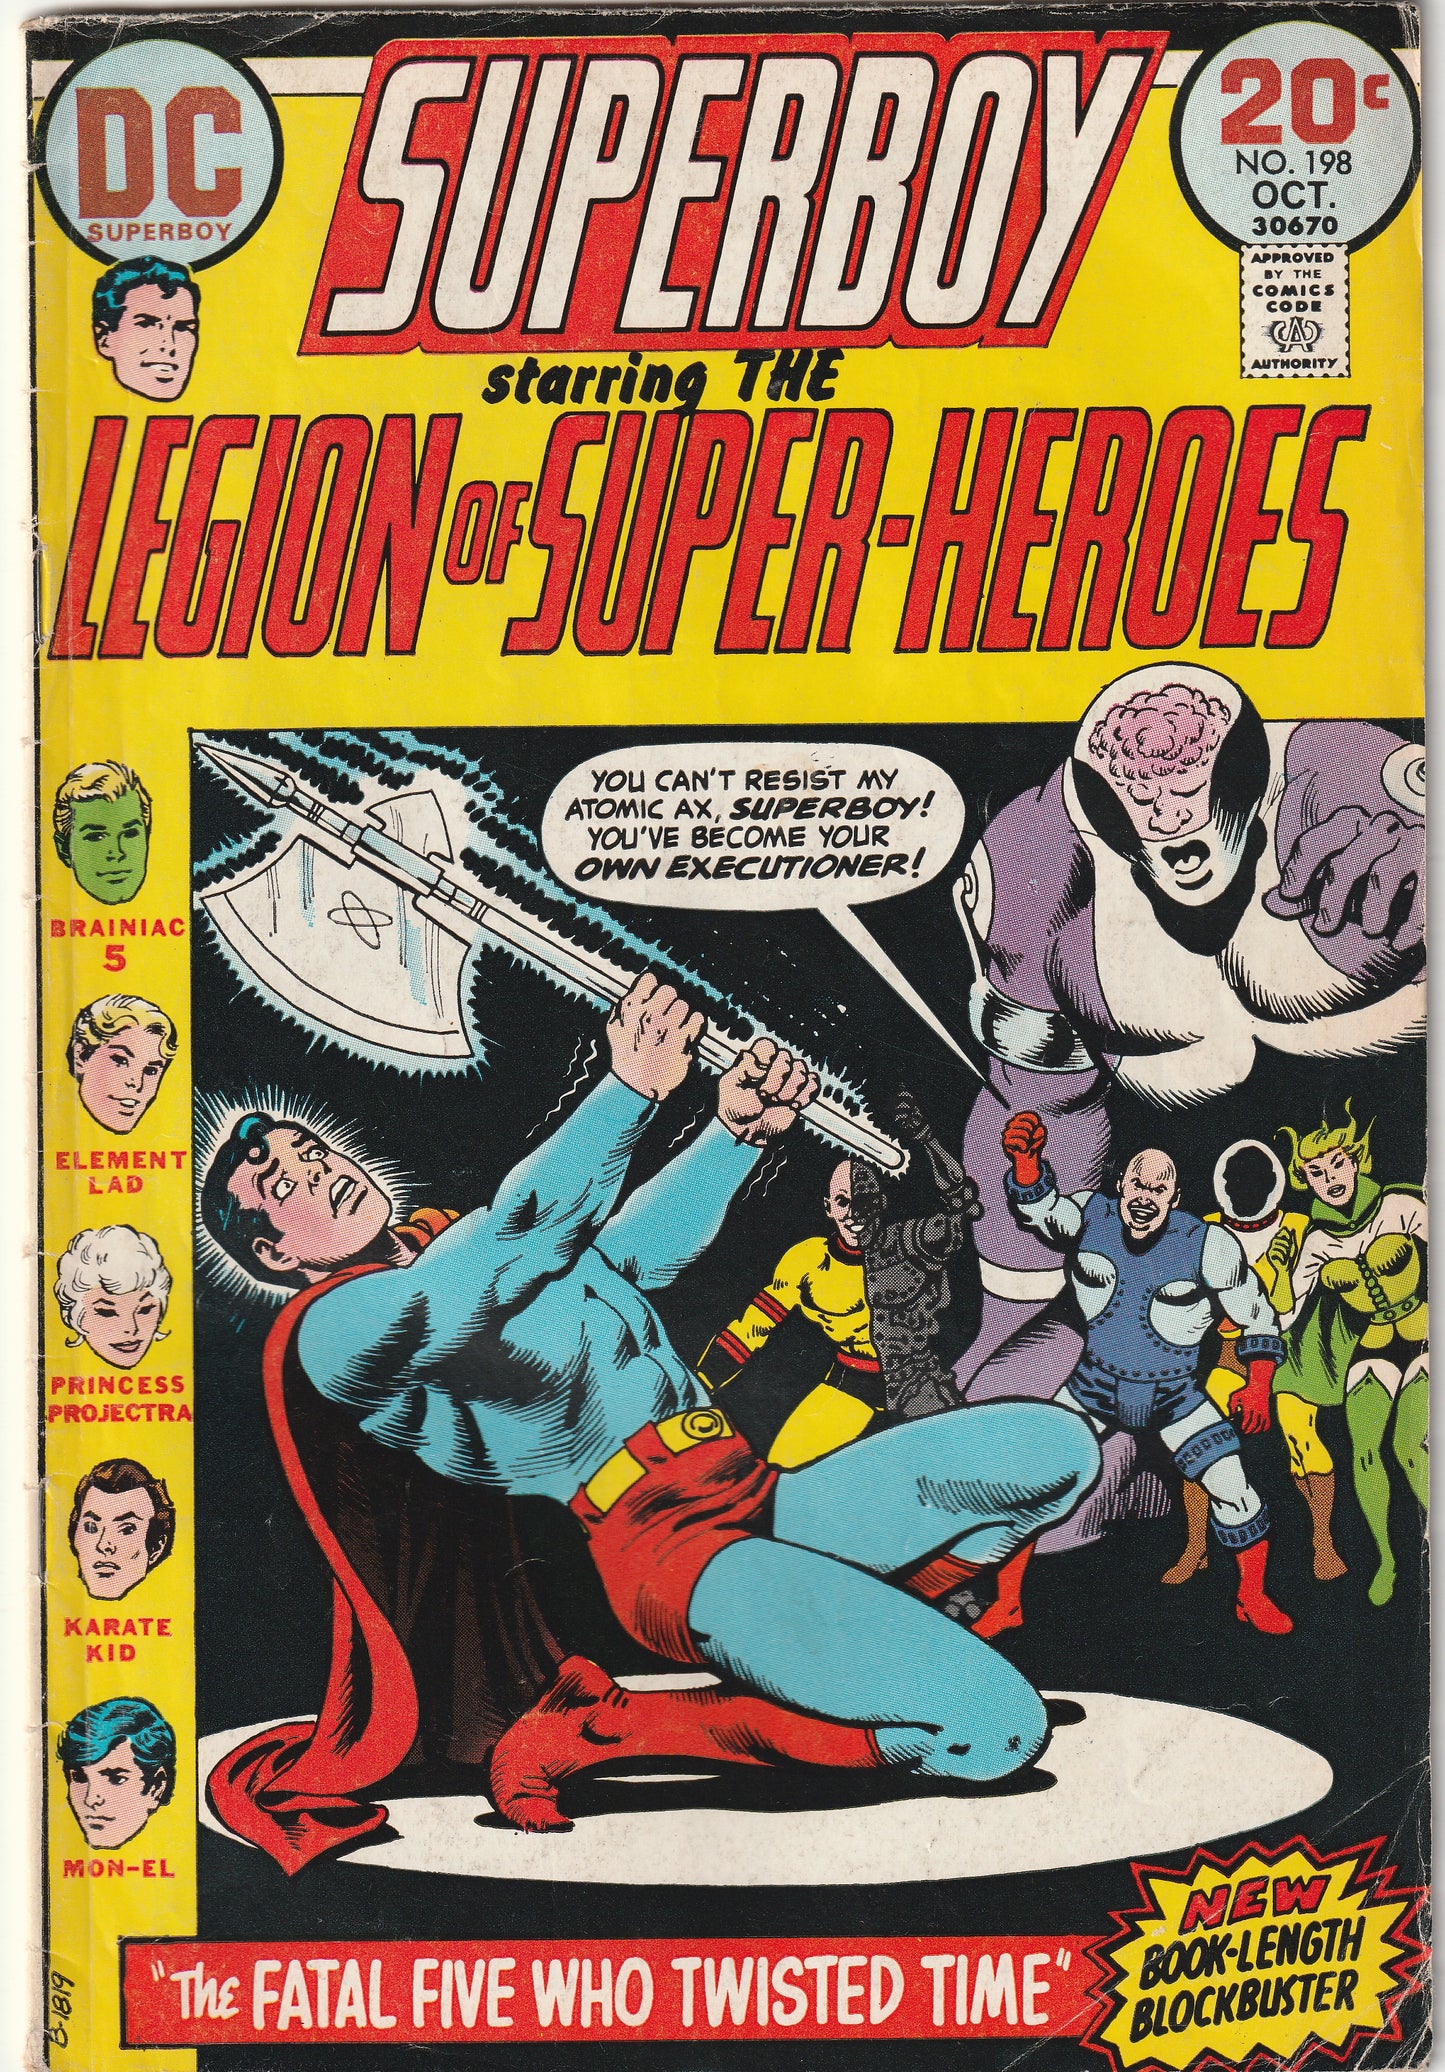 Superboy #198 (1973) - Starring the Legion of Super-Heroes